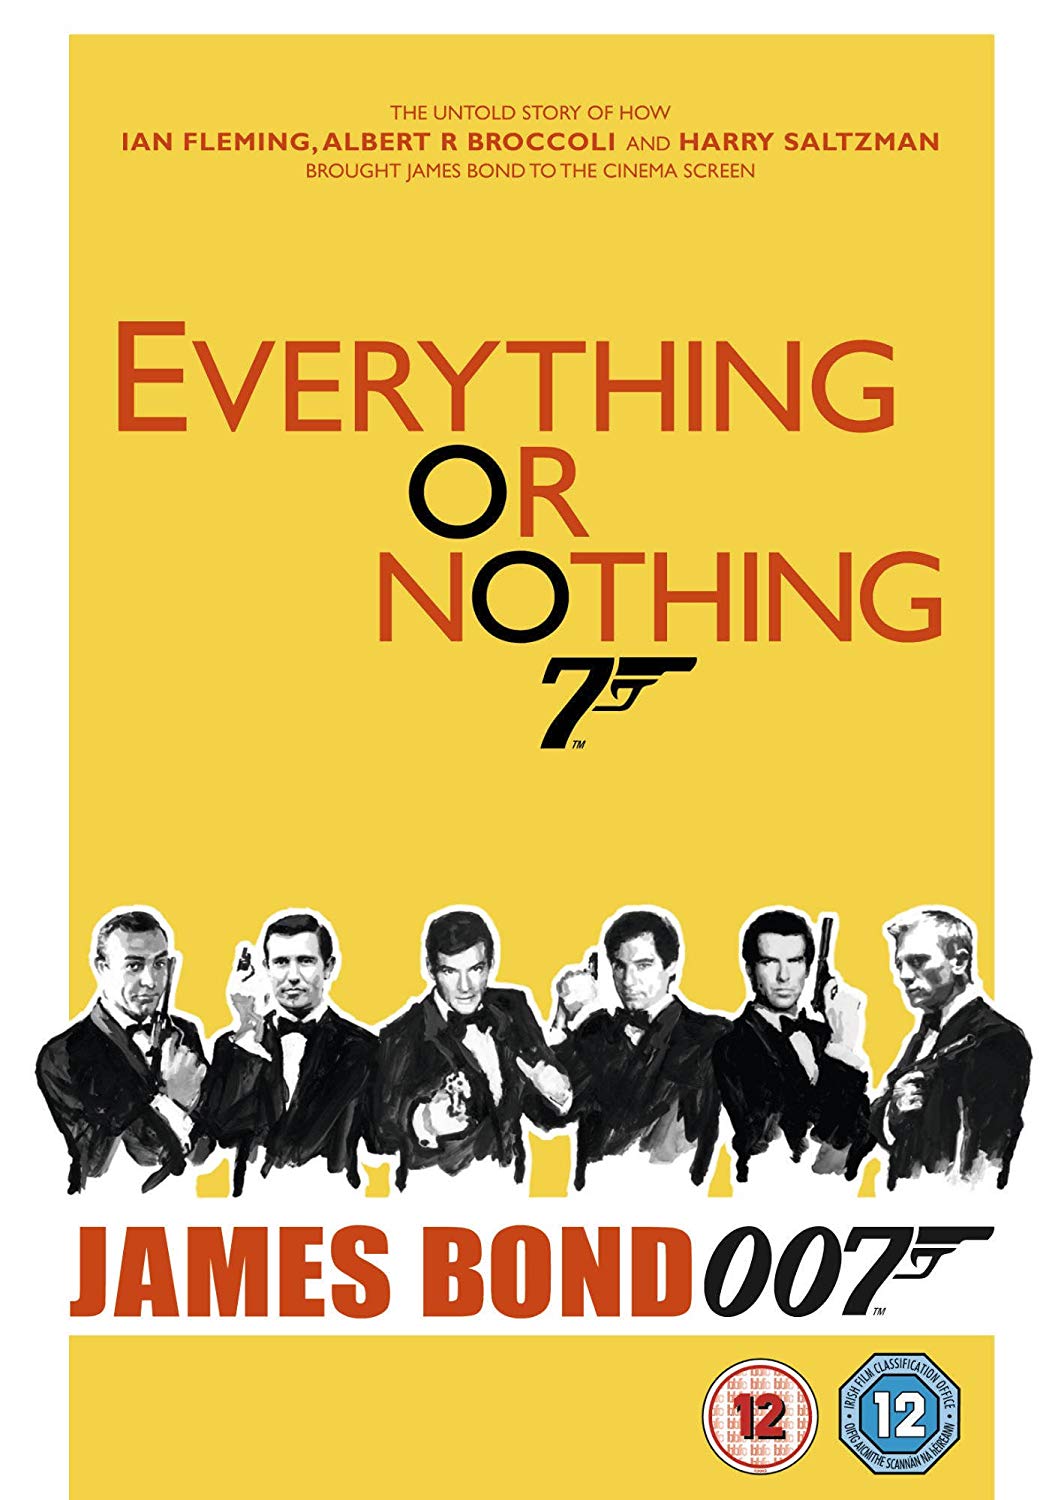 TOP13：Everything or Nothing: The Untold Story of 007